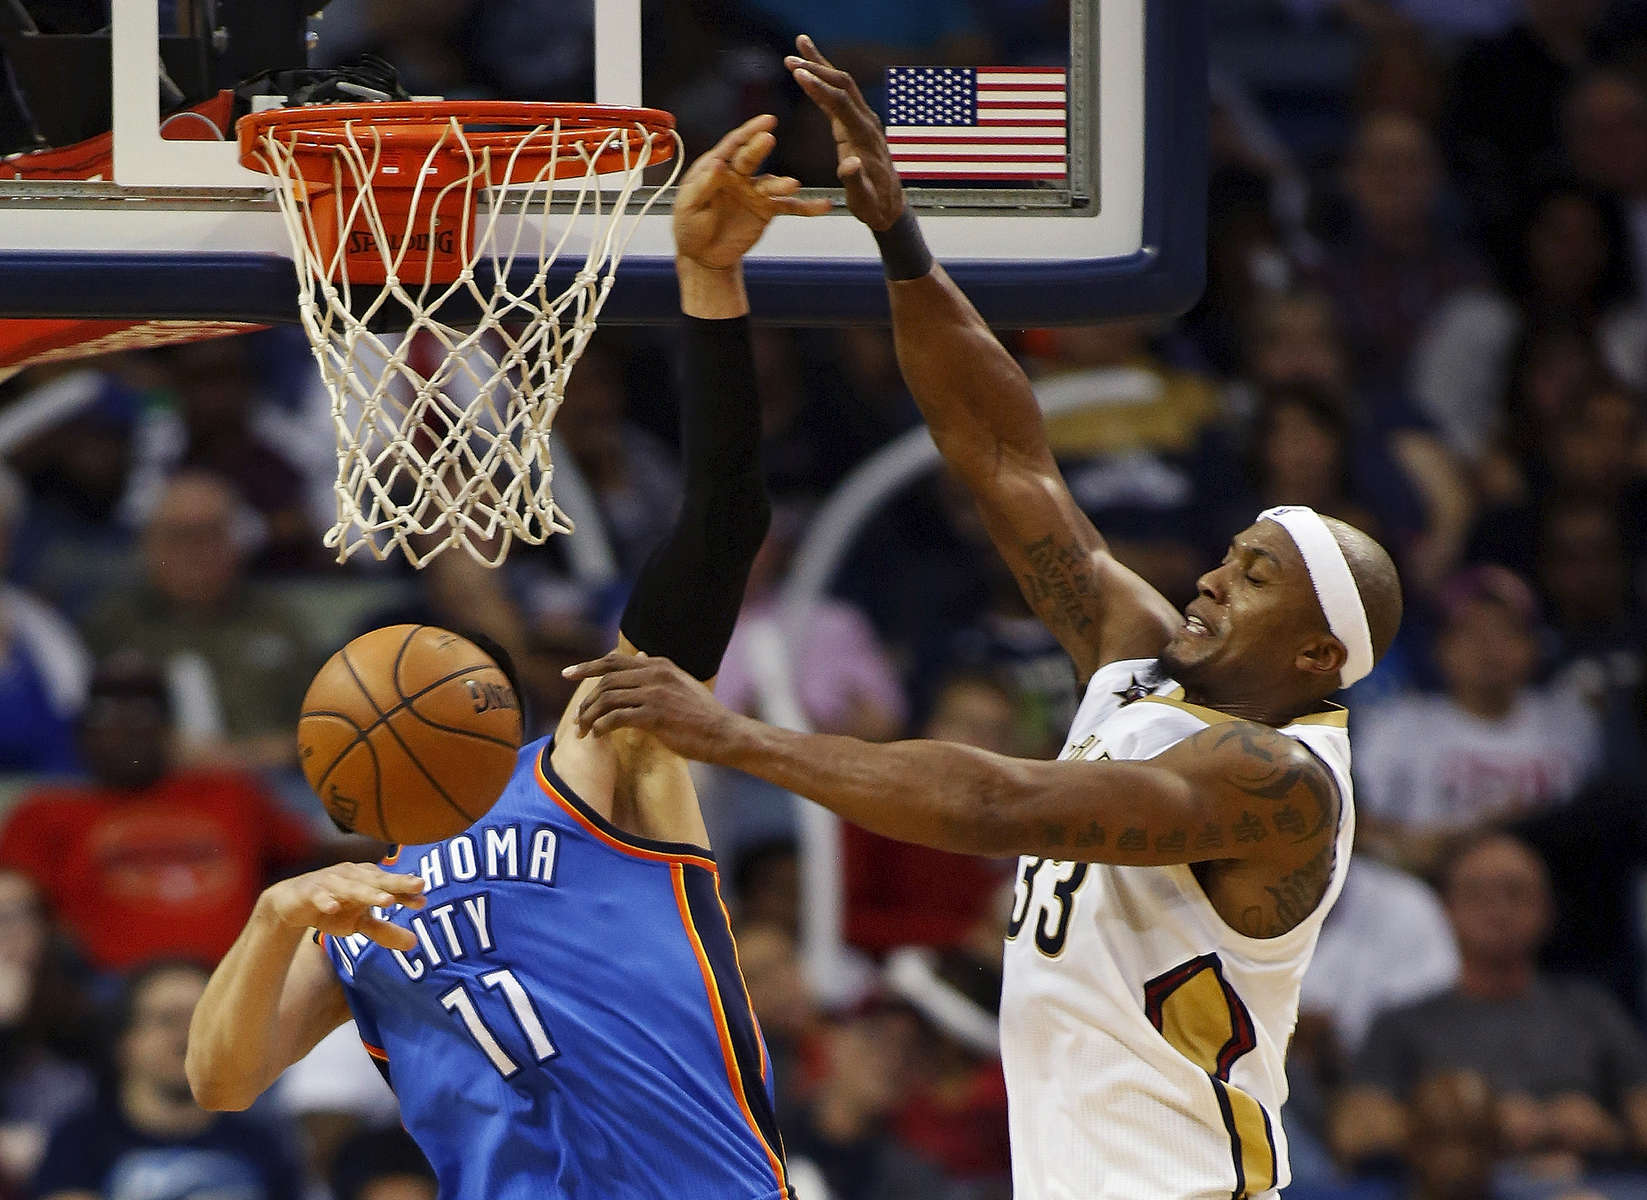 New Orleans Pelicans forward Dante Cunningham, right, blocks an attempted layup by Oklahoma City Thunder center Enes Kanter (11) in the second half of an NBA basketball game in New Orleans, Wednesday, Jan. 25, 2017. The Thunder won 114-105. (AP Photo/Max Becherer)